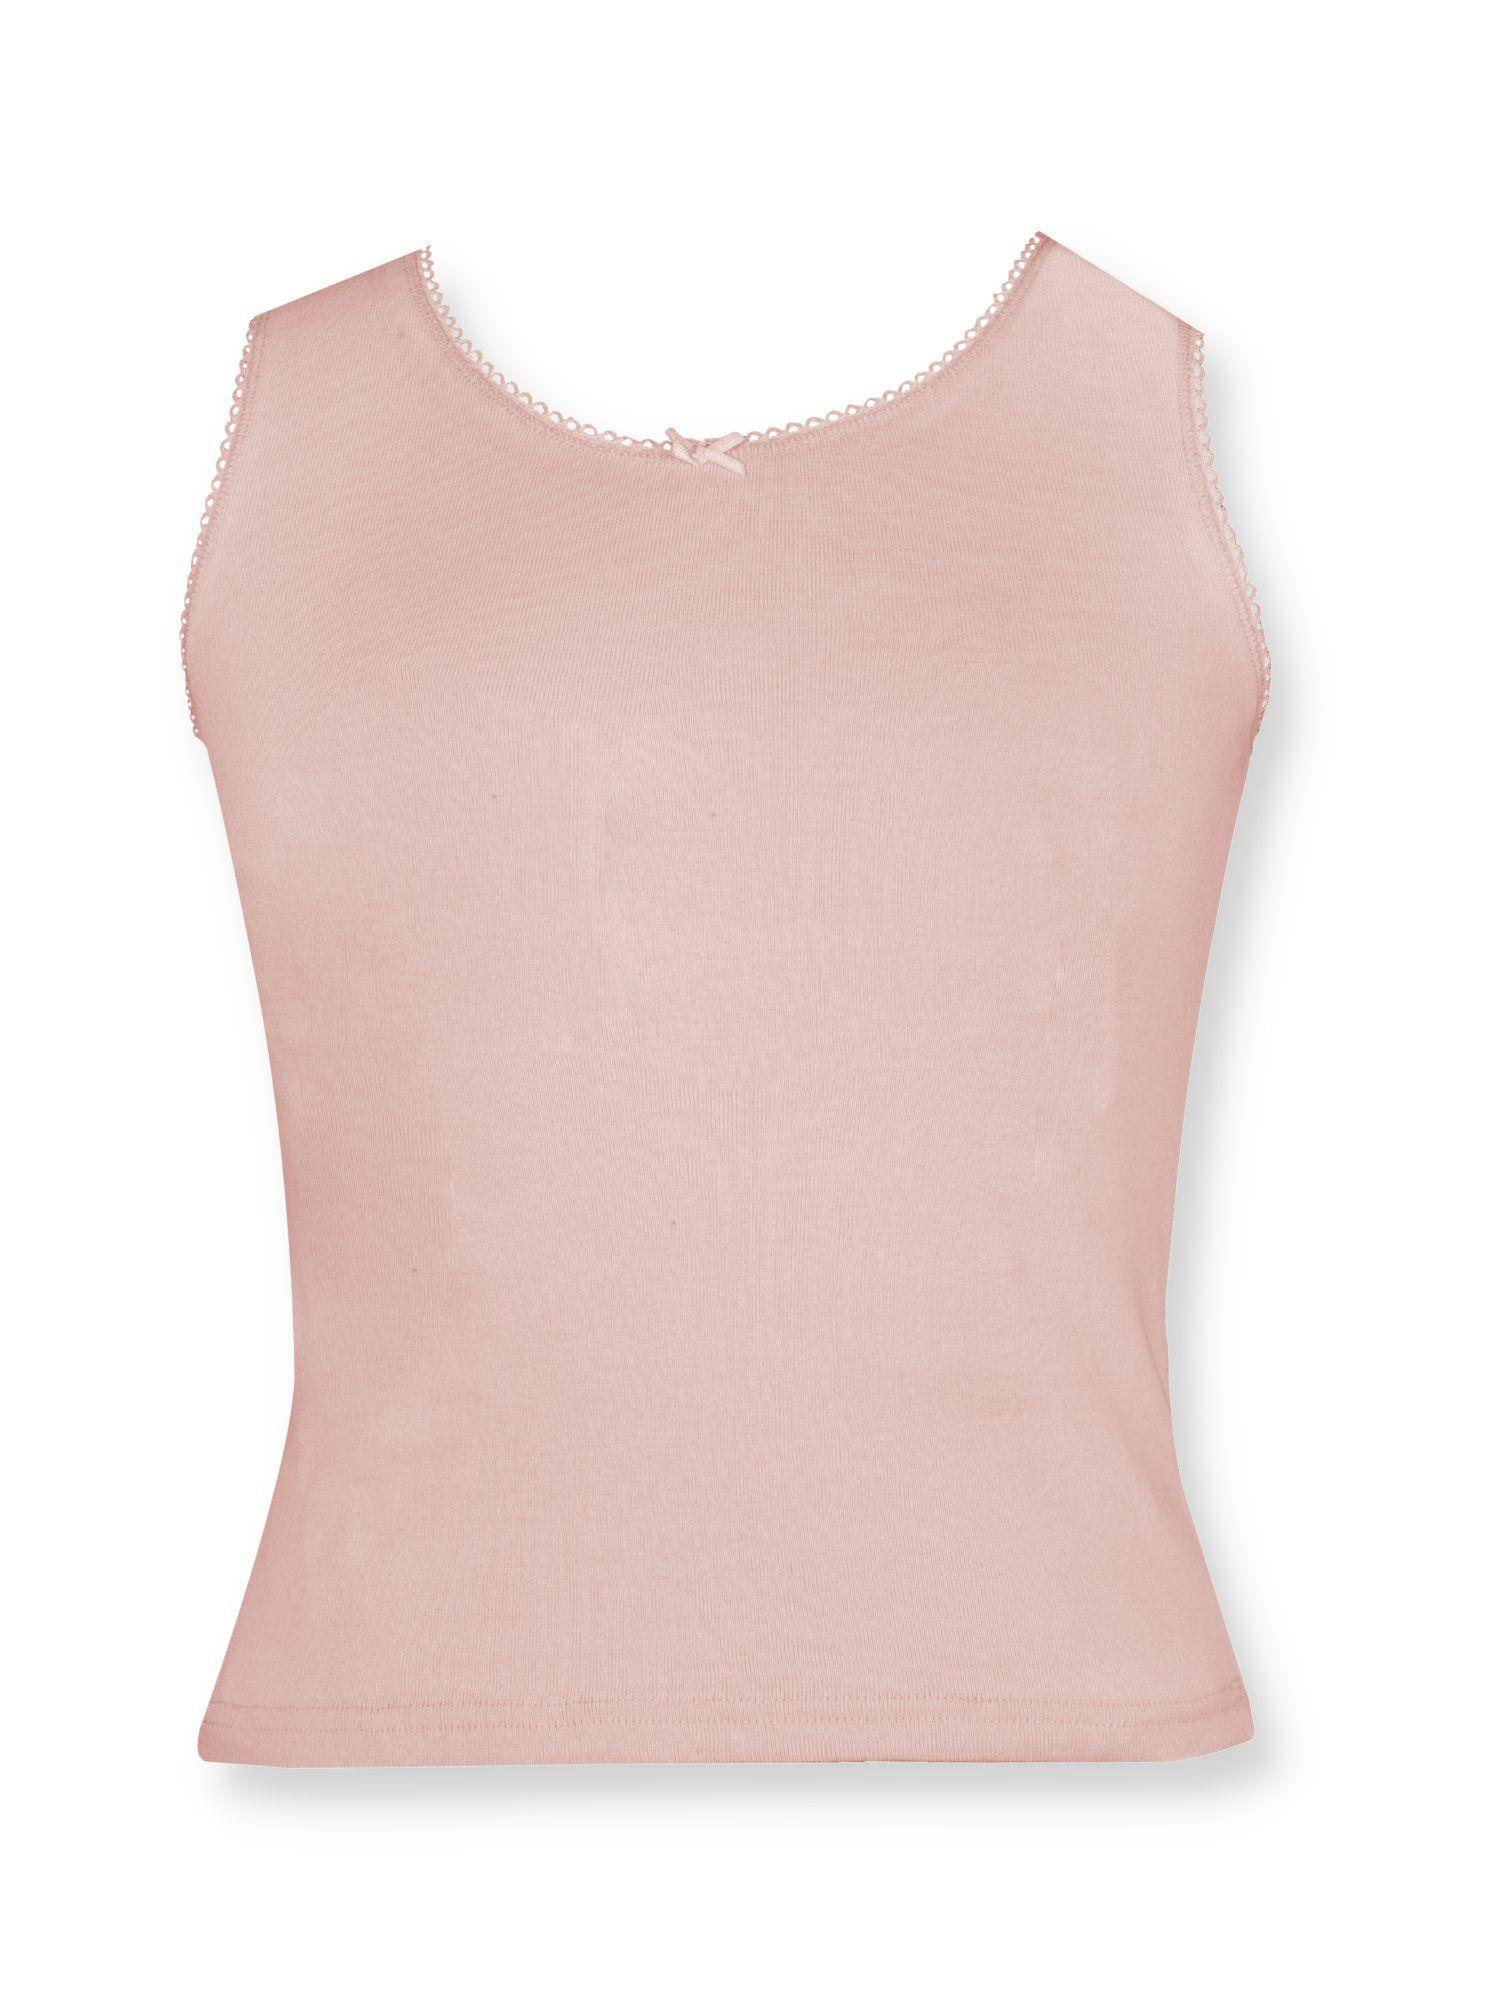 dchica-girls-pink-full-coverage-broad-strap-cotton-camisole-pack-of-1